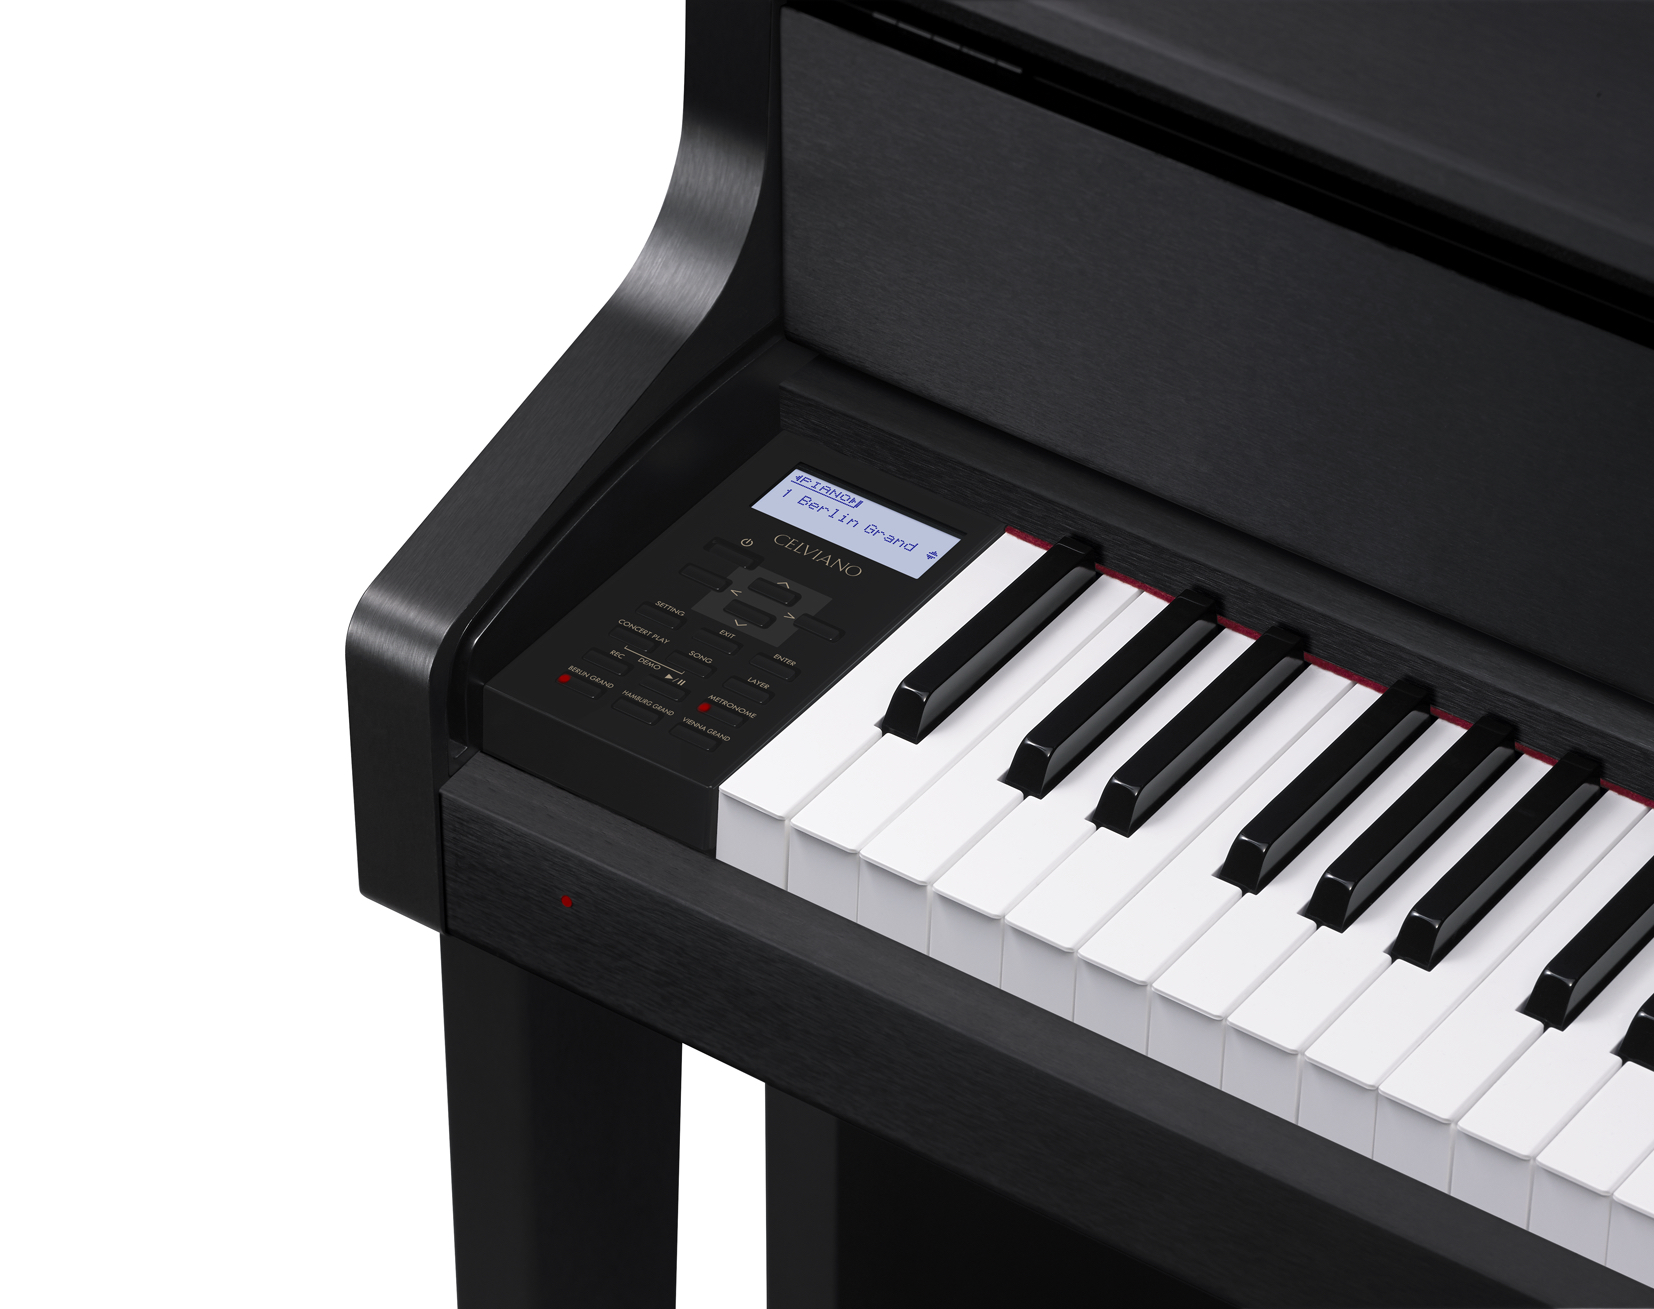 Gp 300bk Celviano Hybrid Grand Piano Electronic Musical Instruments Casio